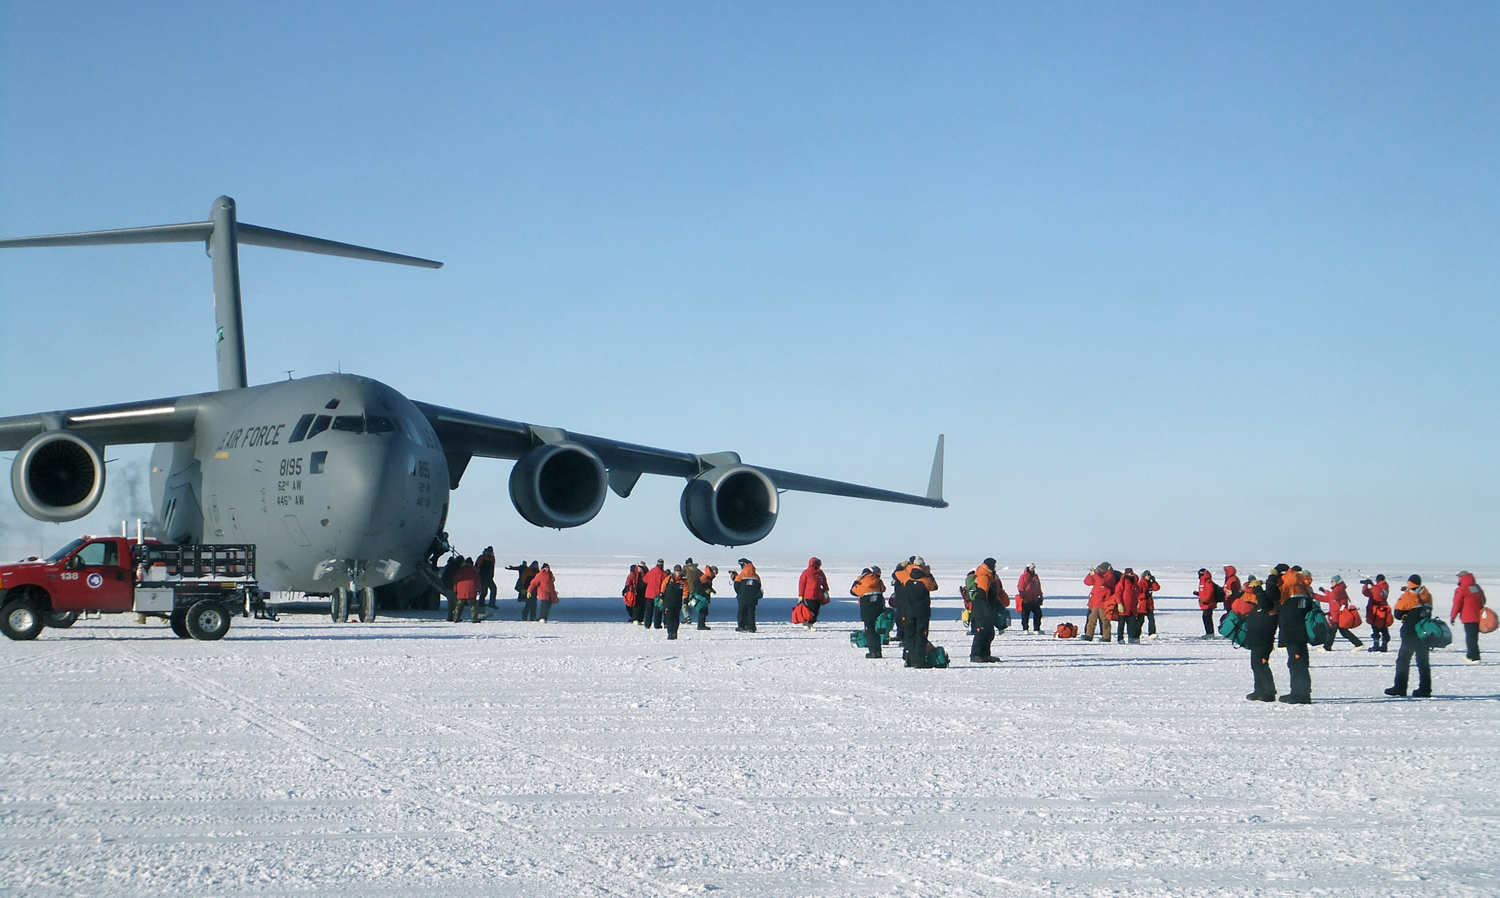 Passengers disembark from an Air Force C-17 Globemaster aircraft near McMurdo Station in the 2011 photo